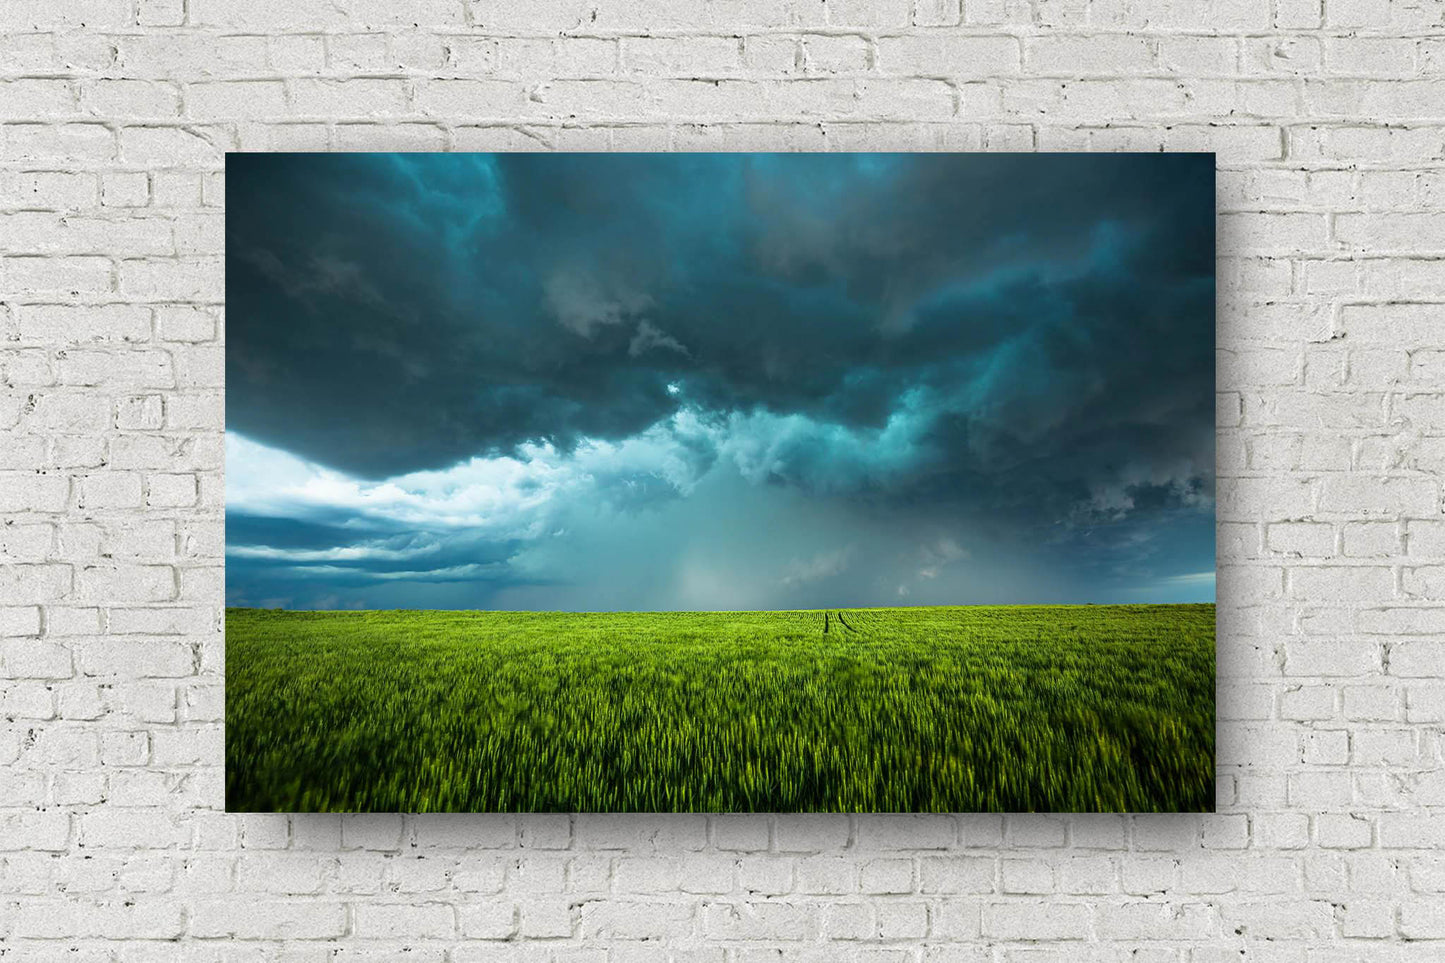 Thunderstorm metal print of teal hued storm clouds over a lush green wheat field on a stormy spring day in Kansas by Sean Ramsey of Southern Plains Photography.